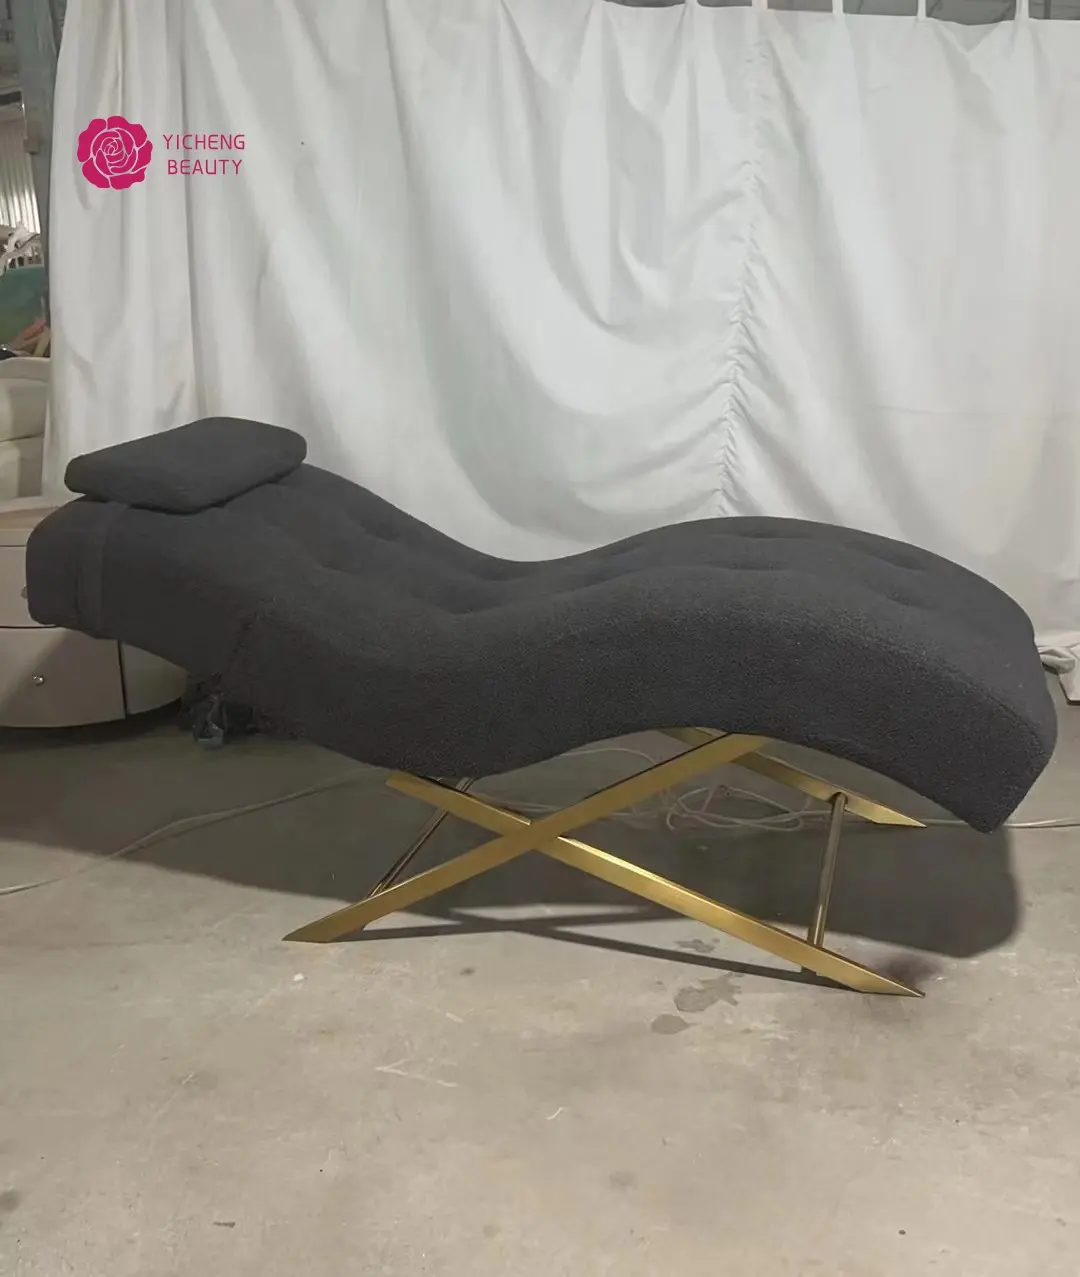 Yicheng Beauty Customized Acceptable Facial Treatment Salon Equipment portable massage table Height Adjustable CE,GS approval